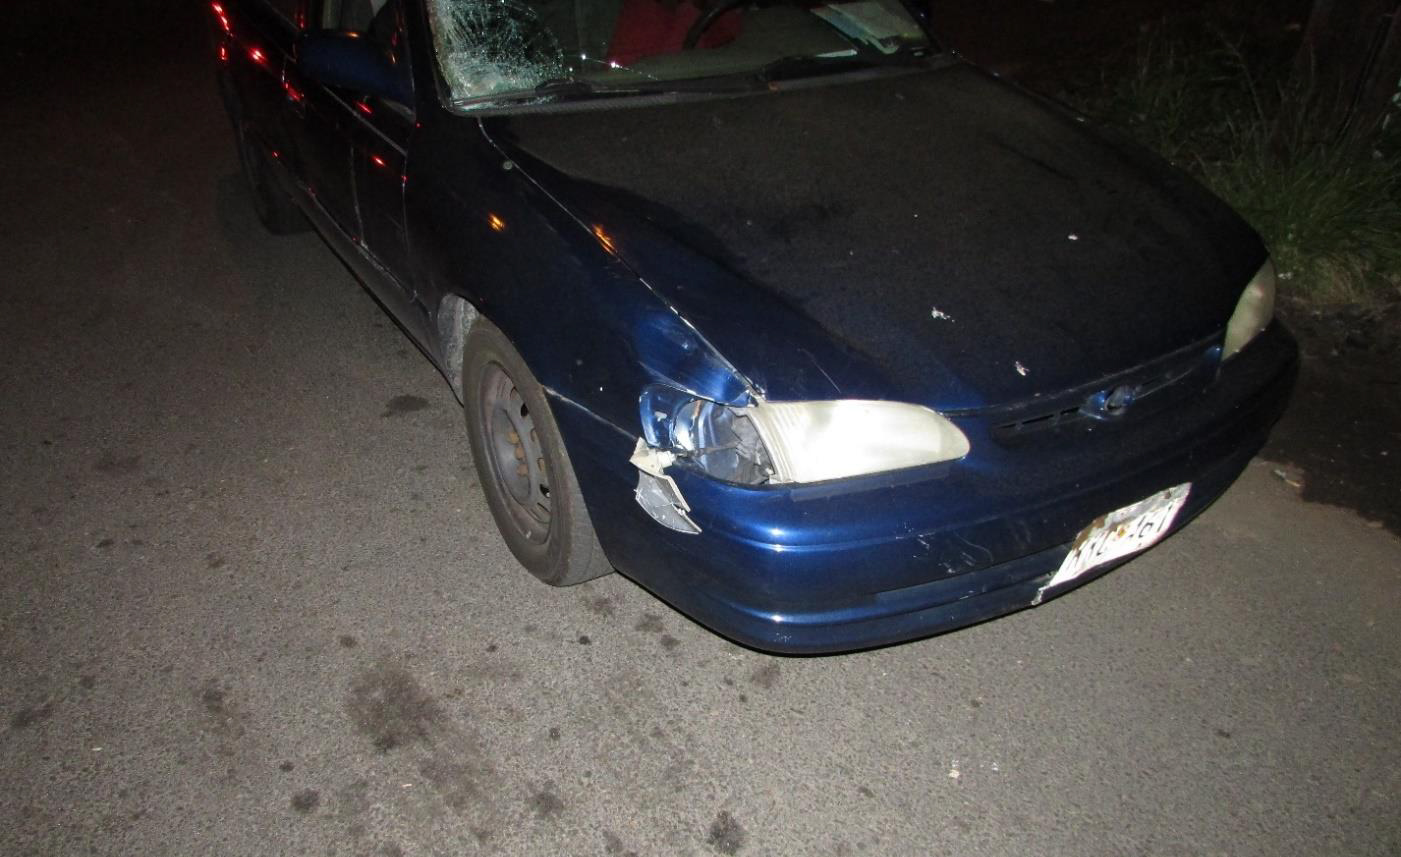 Photograph of crash car taken at scene showing damage to bumper, hood, and windshield from impact with pedestrian.